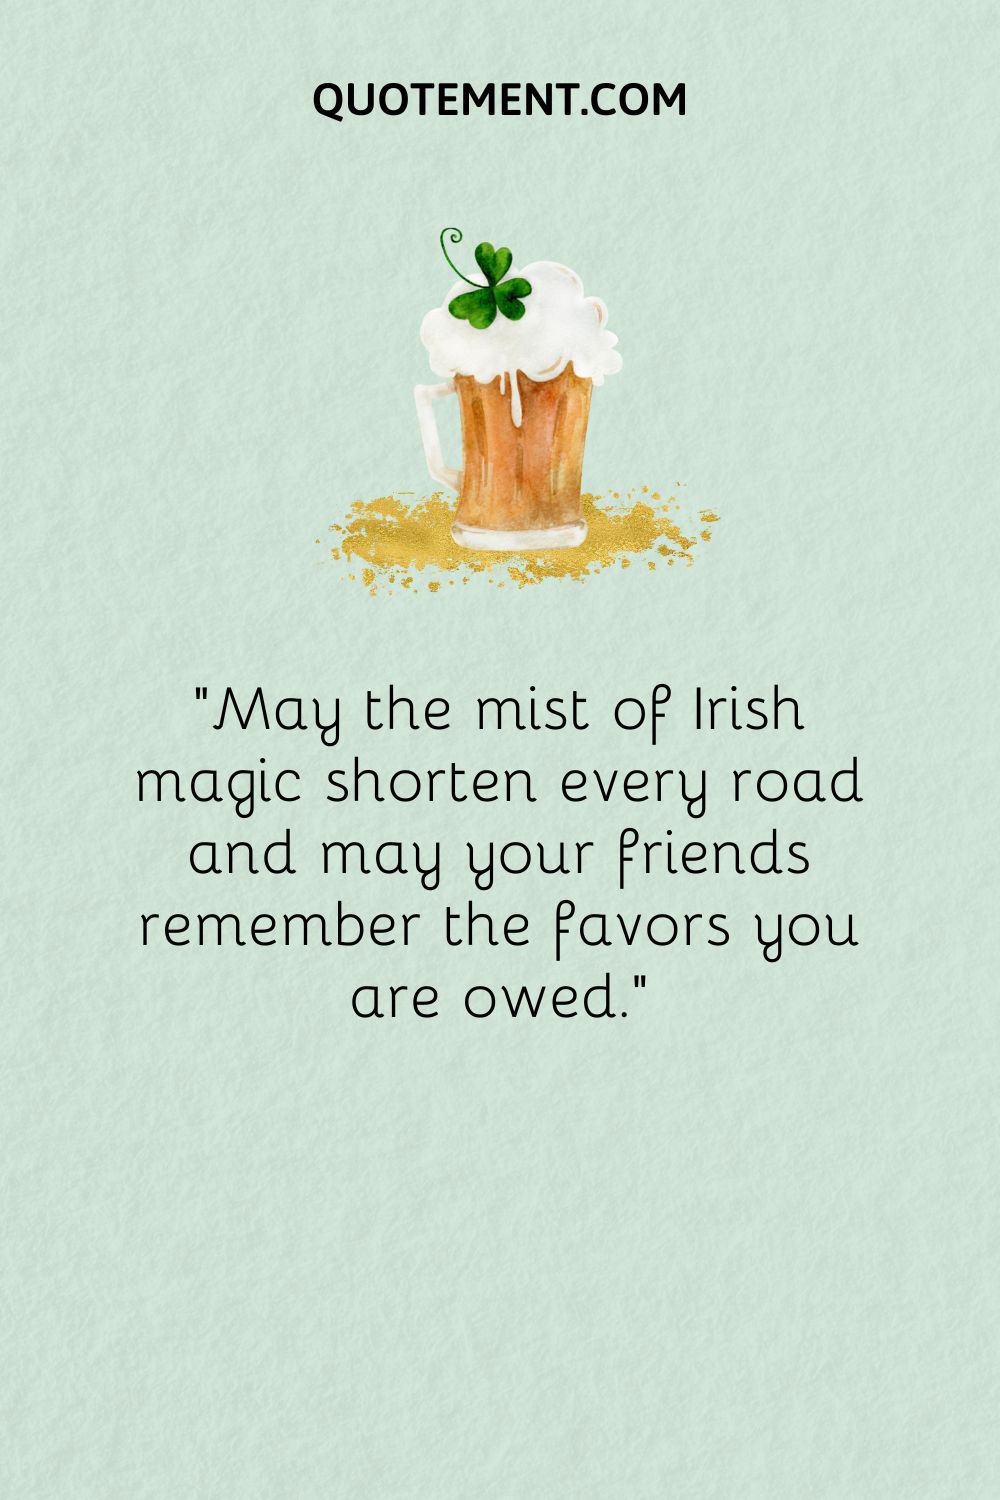 May the mist of Irish magic shorten every road and may your friends remember the favors you are owed